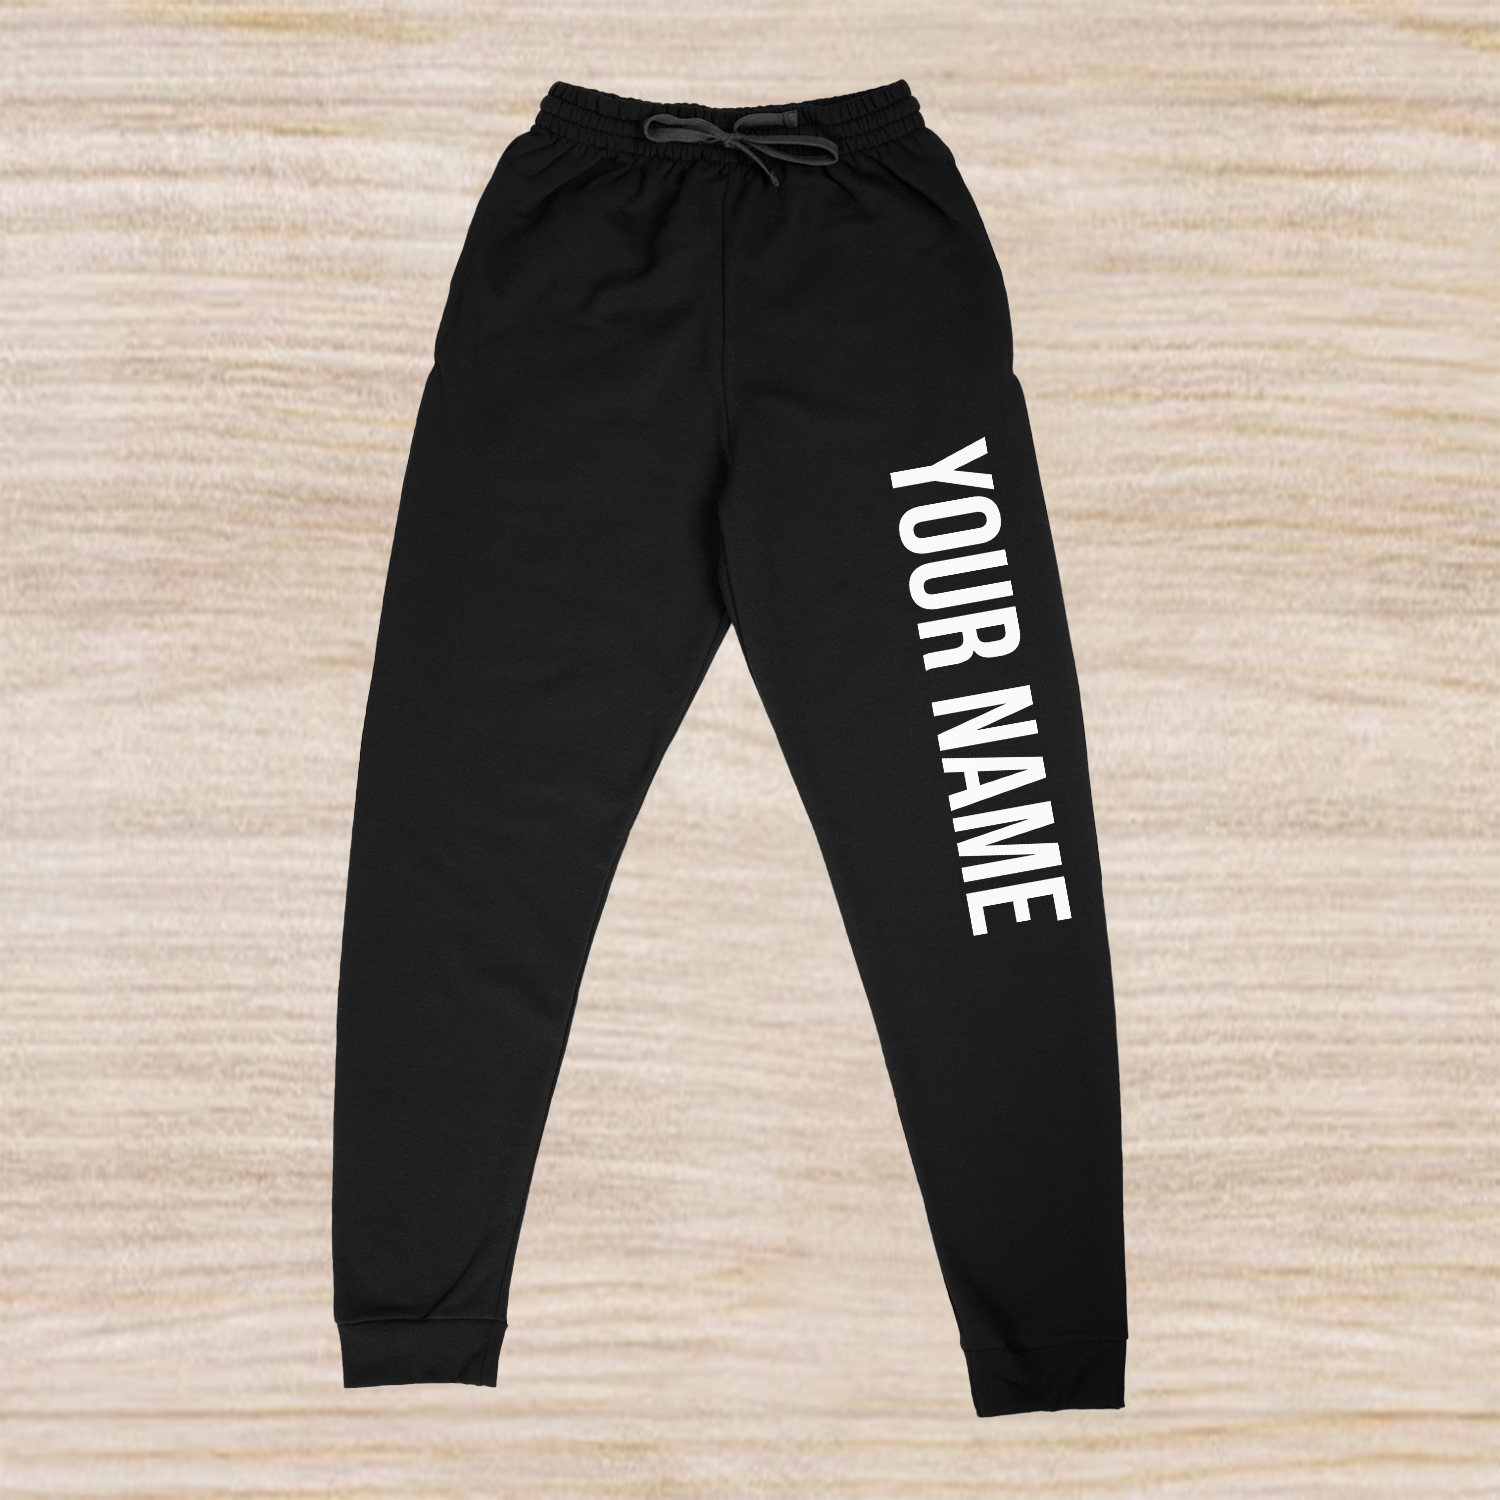 Customized Name Sweatpants for Men and Women